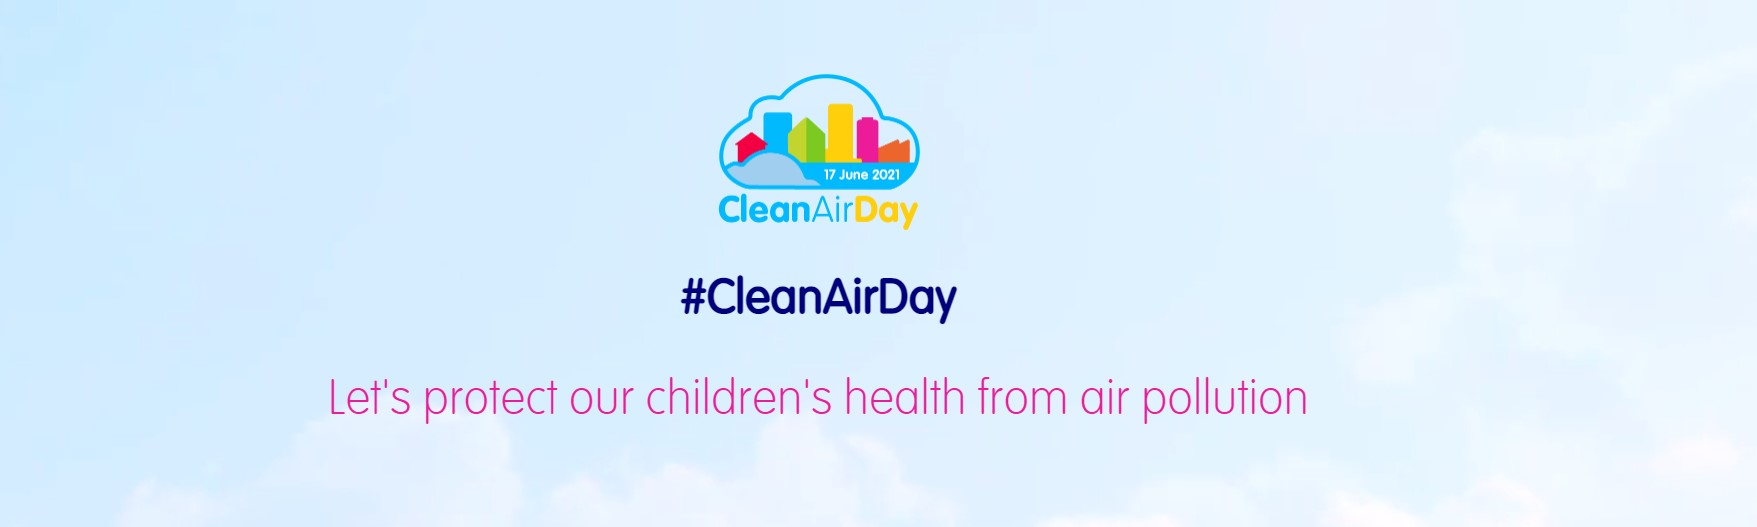 Pro-public transport messages highlighted during Clean Air Day